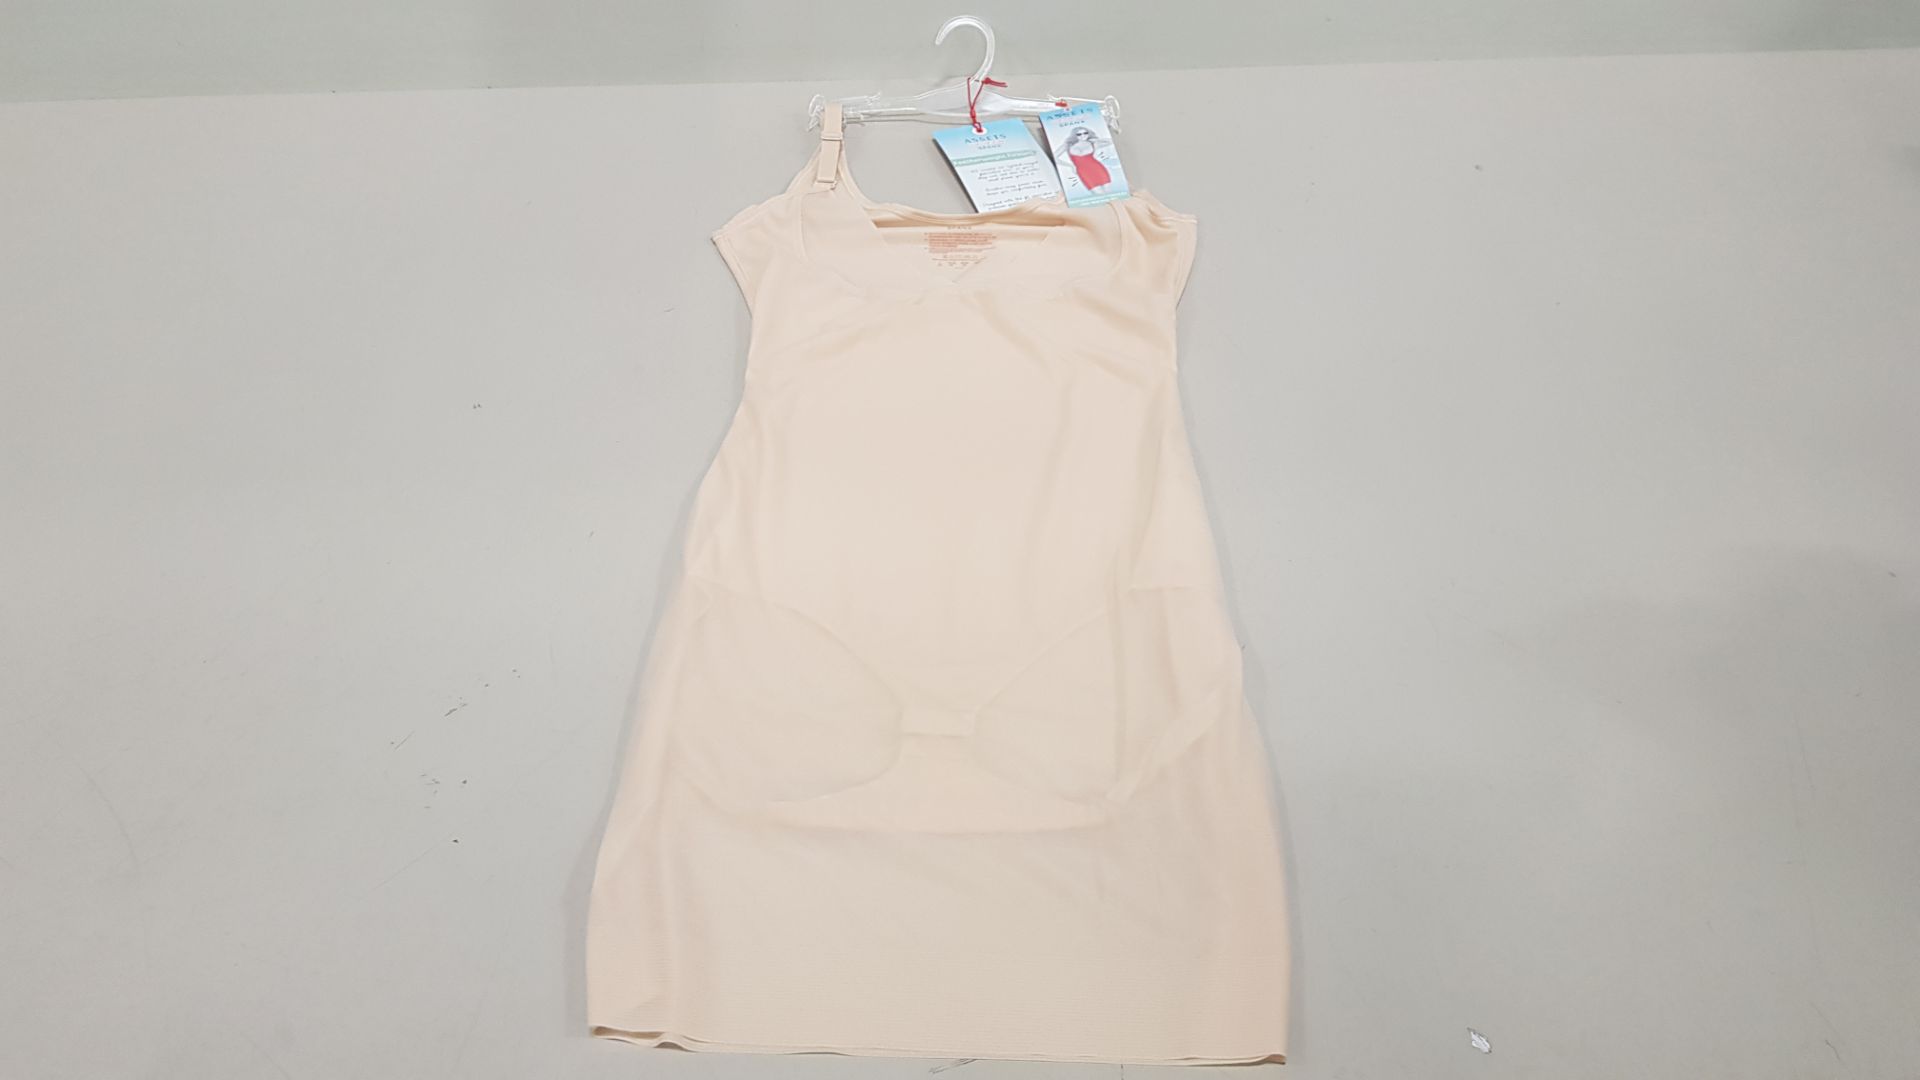 27 X BRAND NEW SPANX OPEN BUST CAMI SHAPERS IN NUDE SIZE 3X